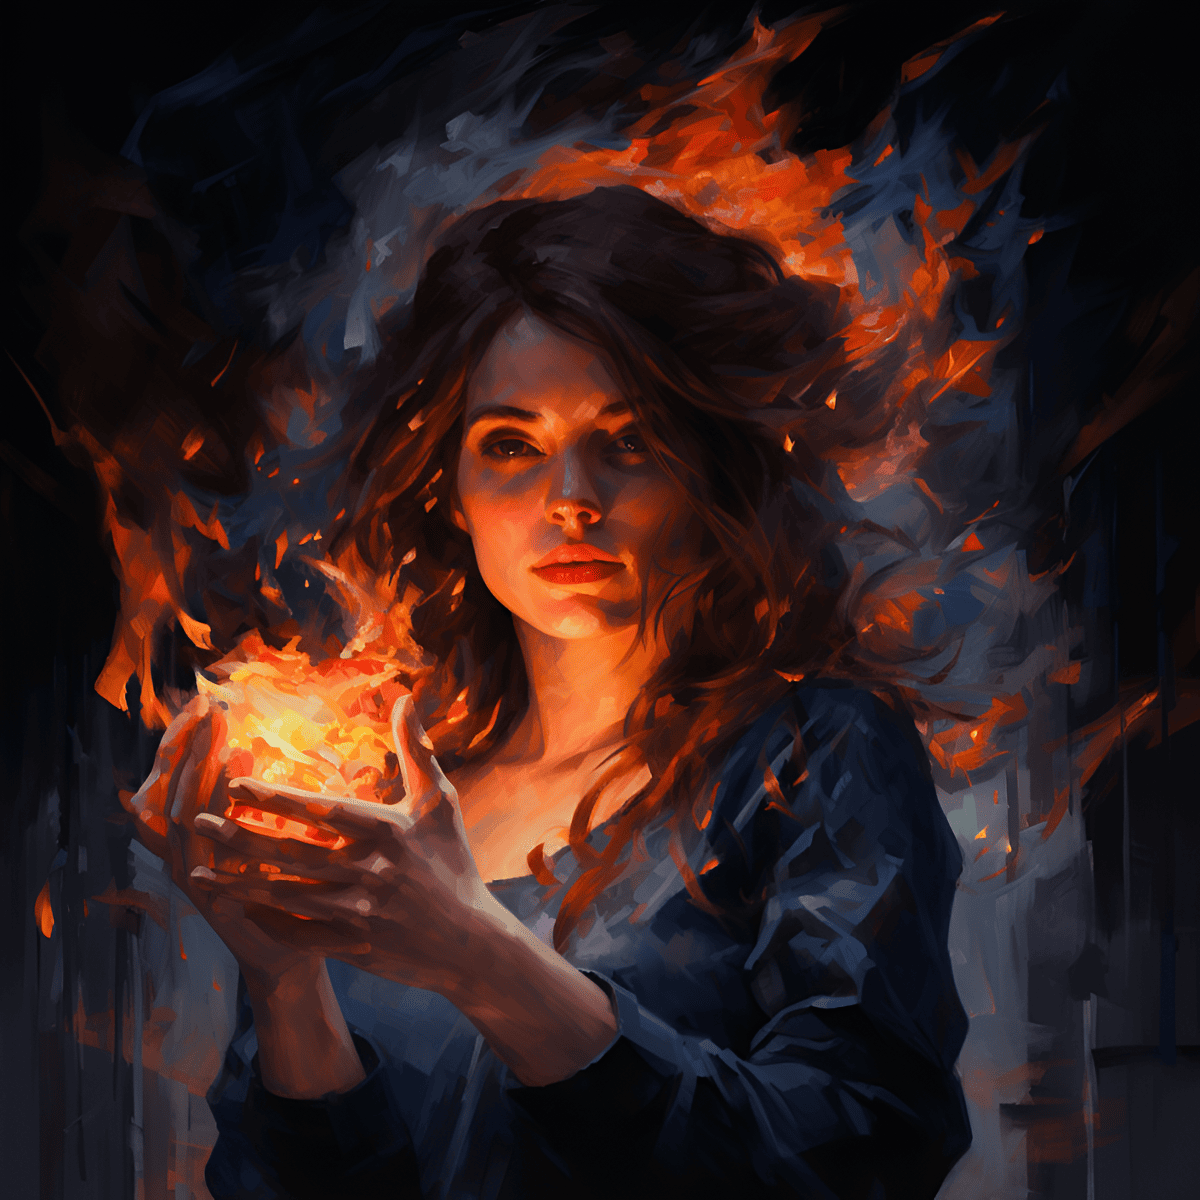 the woman holds fire in her hands